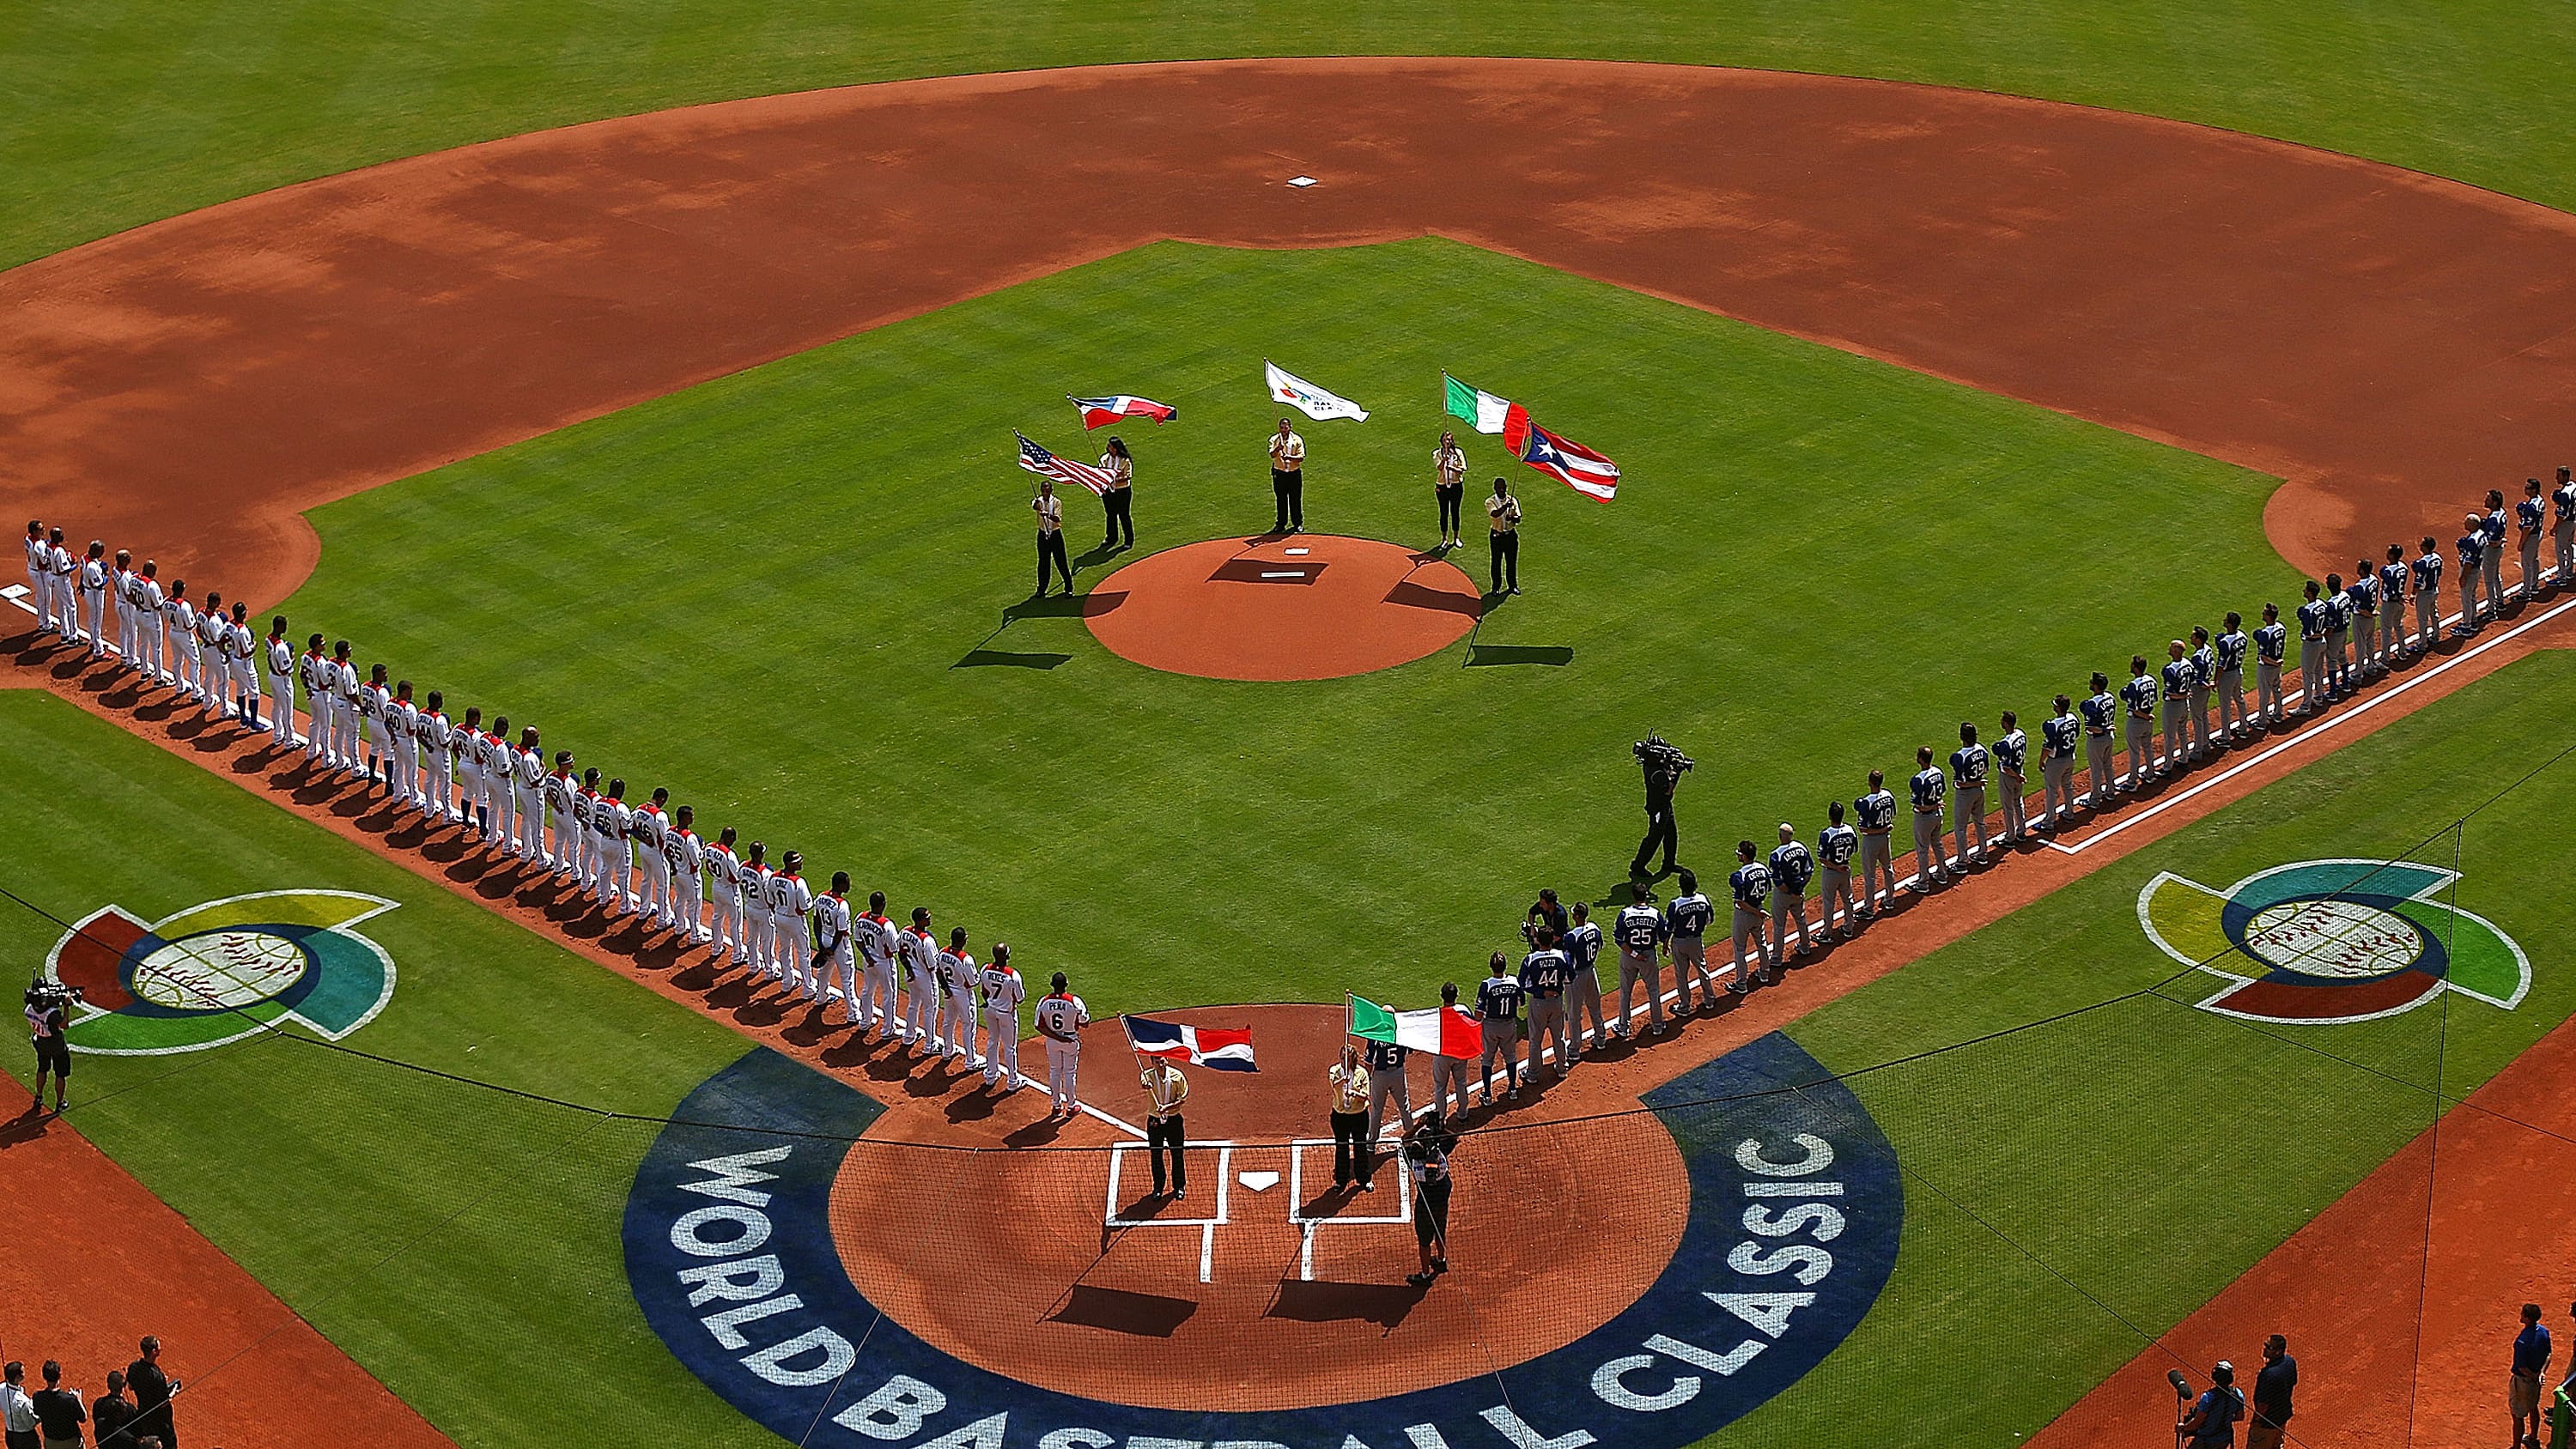 USA in World Baseball Classic 2023 final Preview, schedule, and how to watch the championship game action live